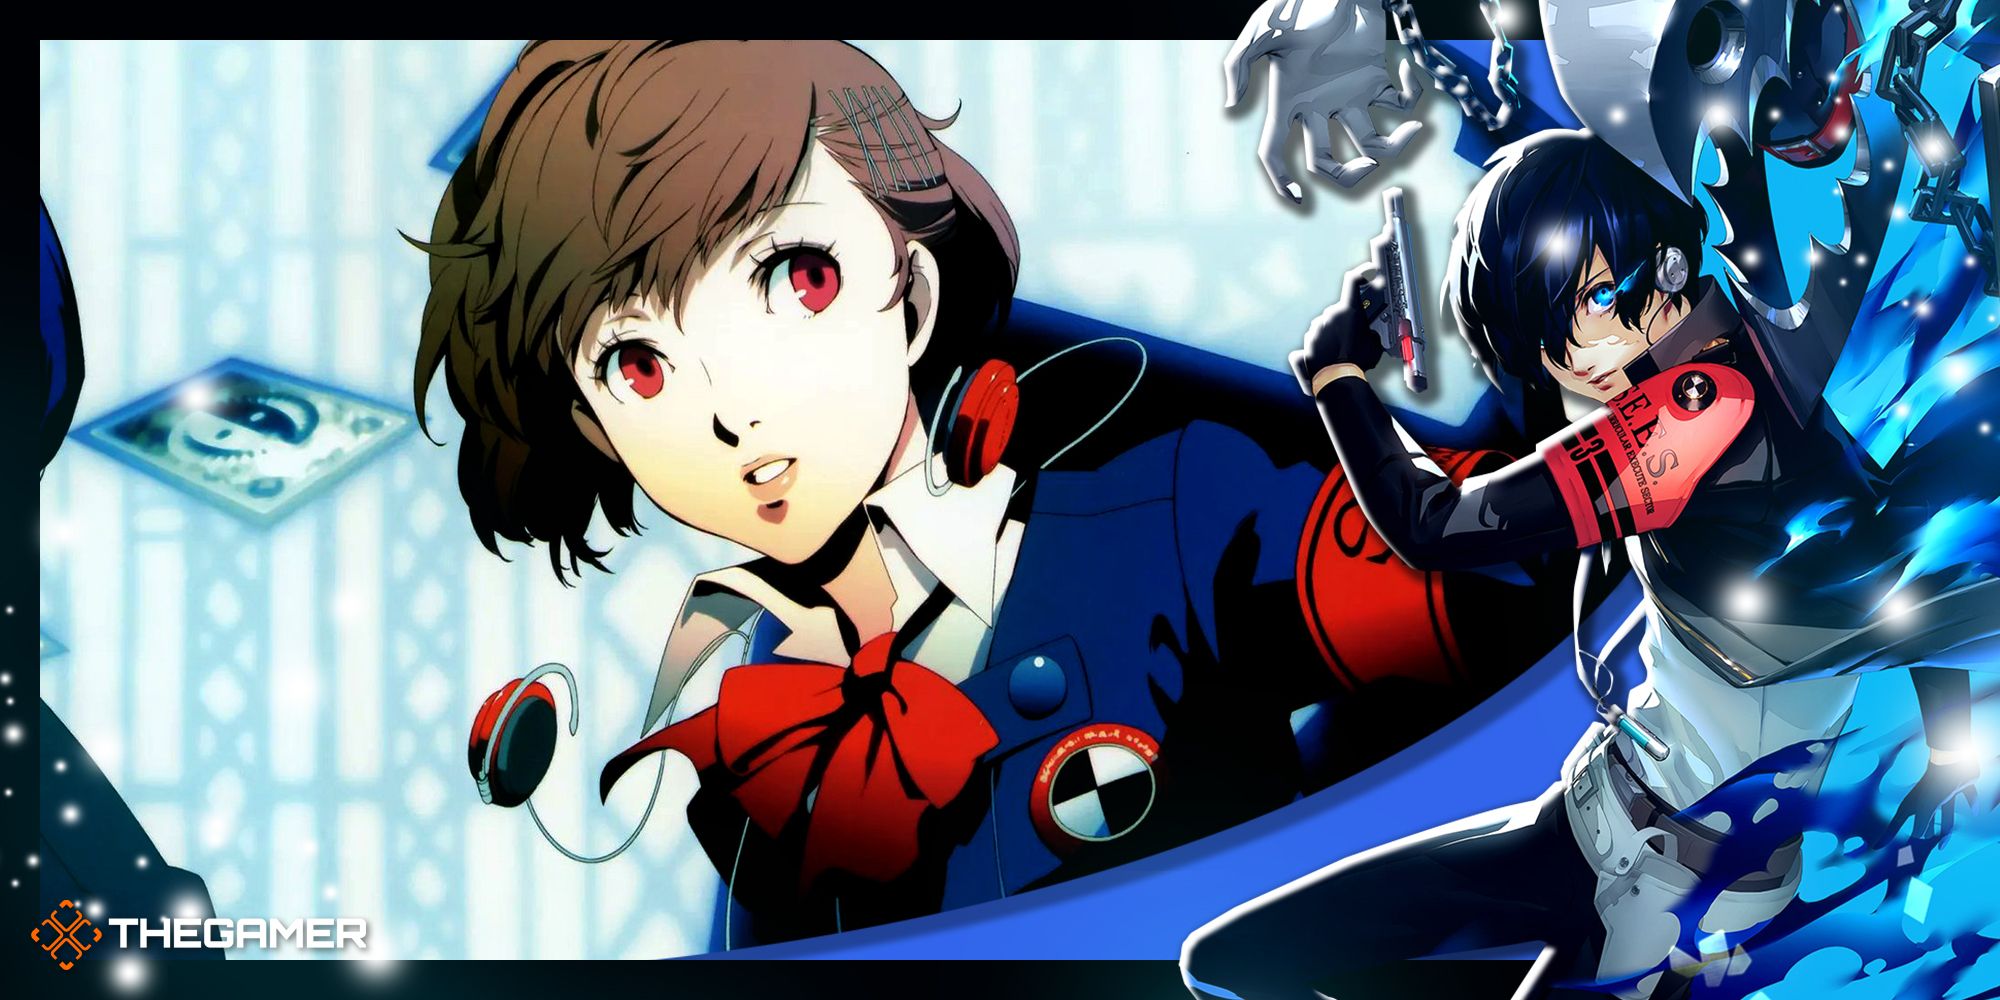 Combined image of the Persona 3 Reload and Persona 3 Portable protagonists